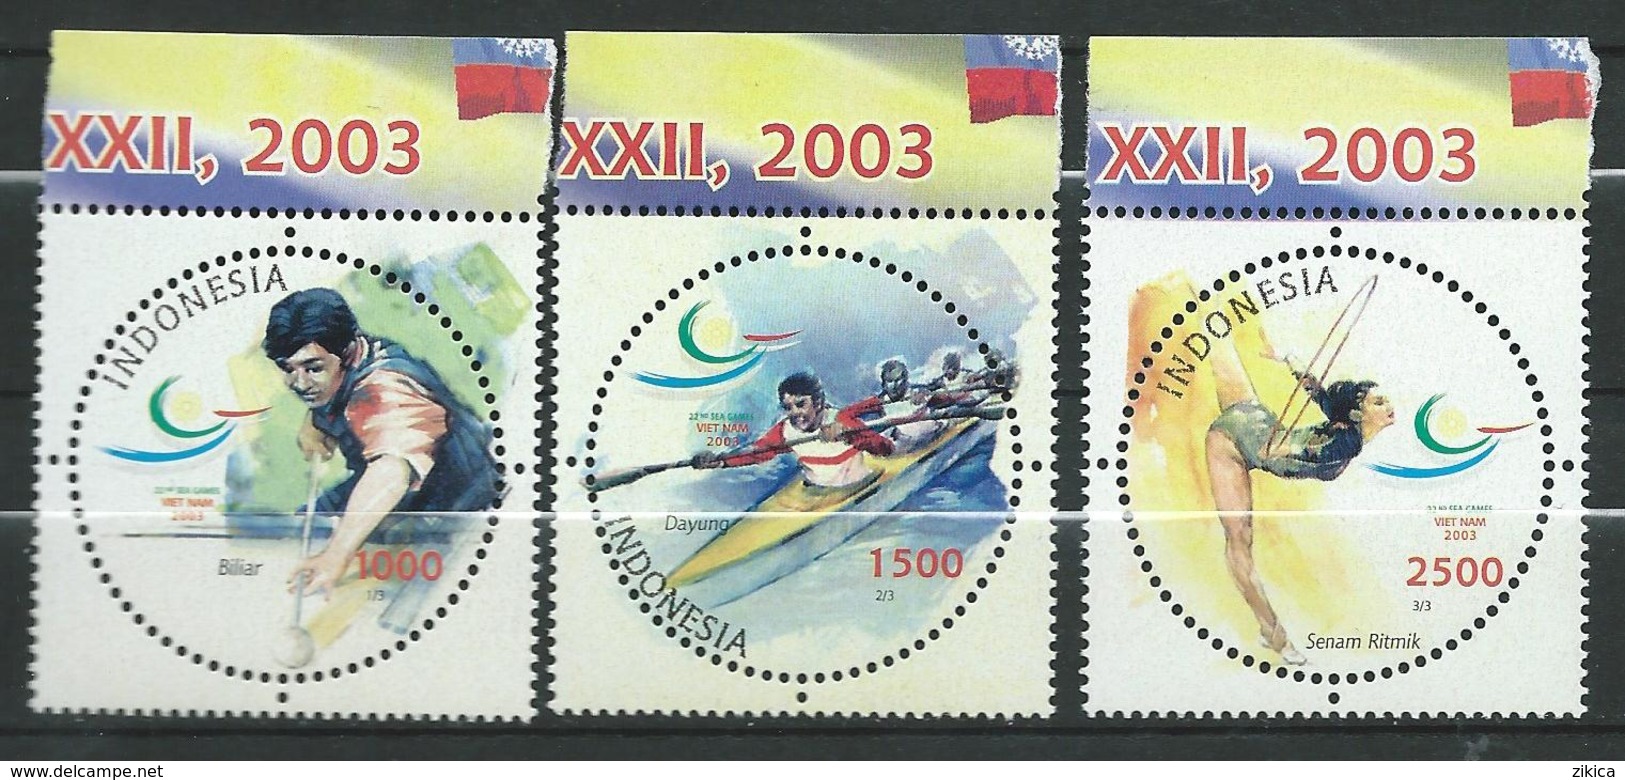 Indonesia 2003 The 22nd South East Asian Games, Vietnam.sport.MNH - Indonesia